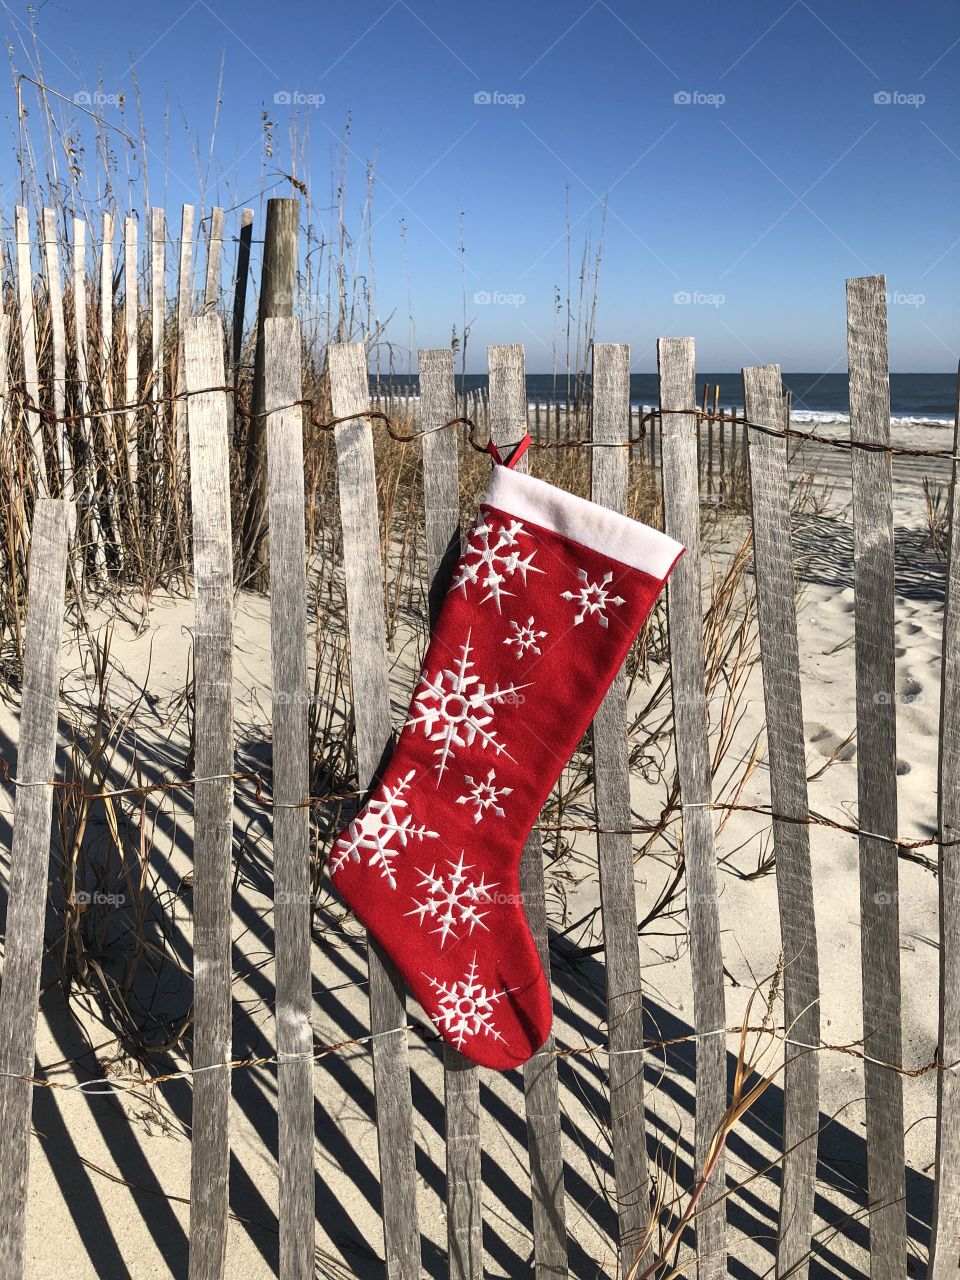 A red Christmas stocking hangs on a beach fence with the Atlantic Ocean in the background. 